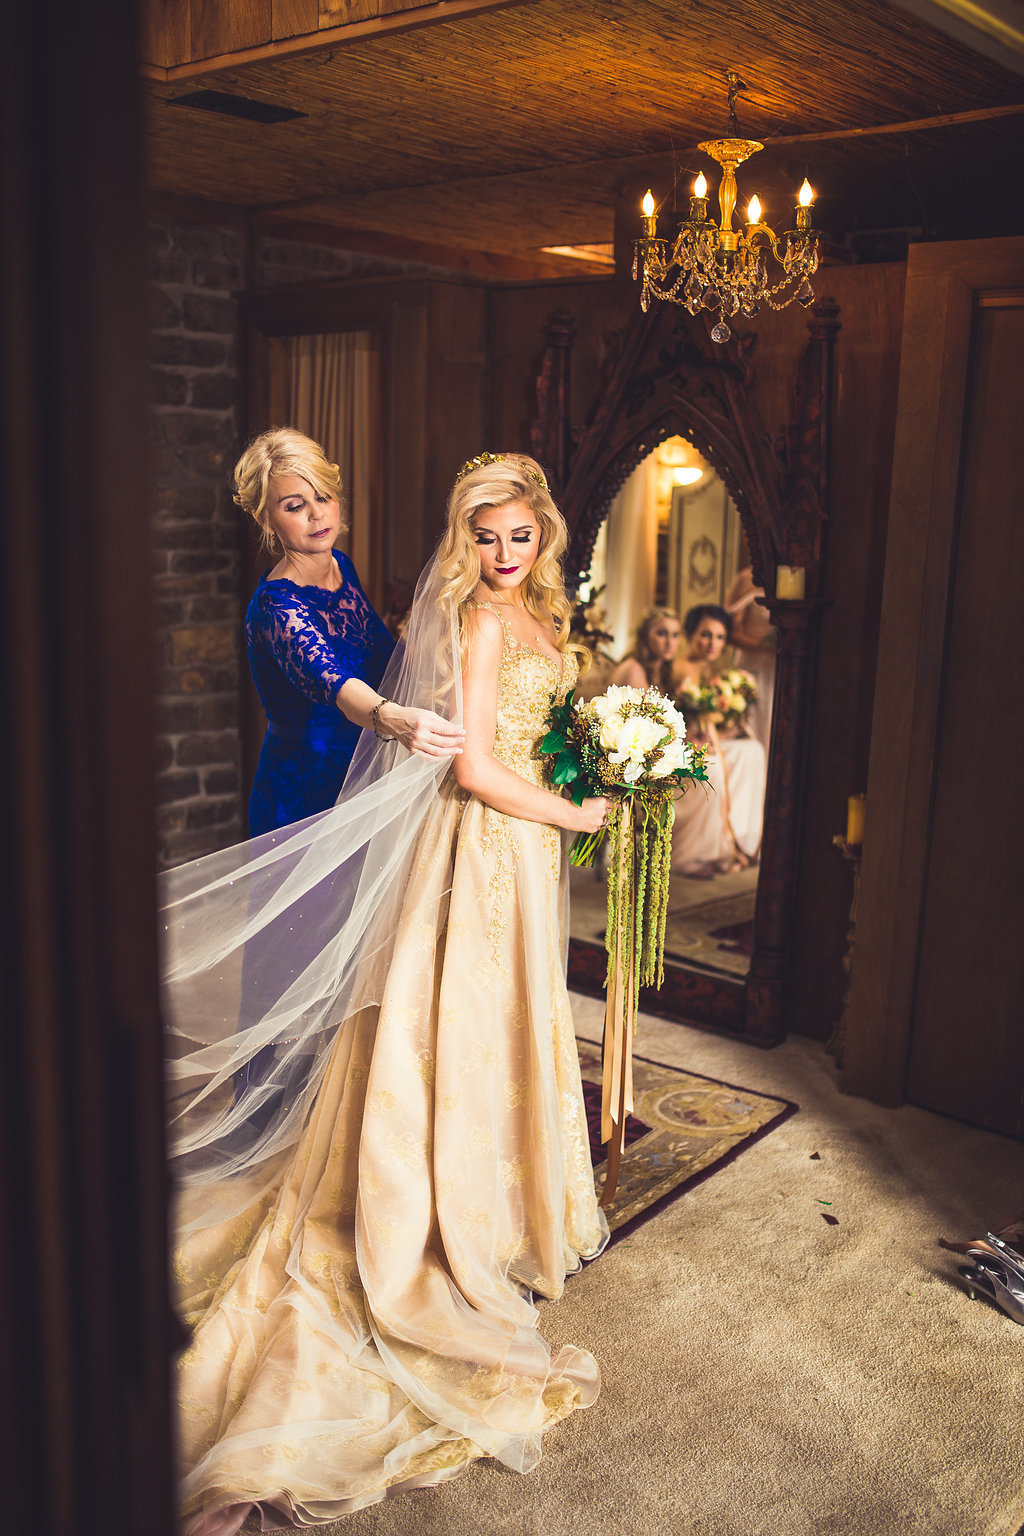 Wedding Photograph Of Maid of Honor and Bride Holding Her Bouquet Los Angeles